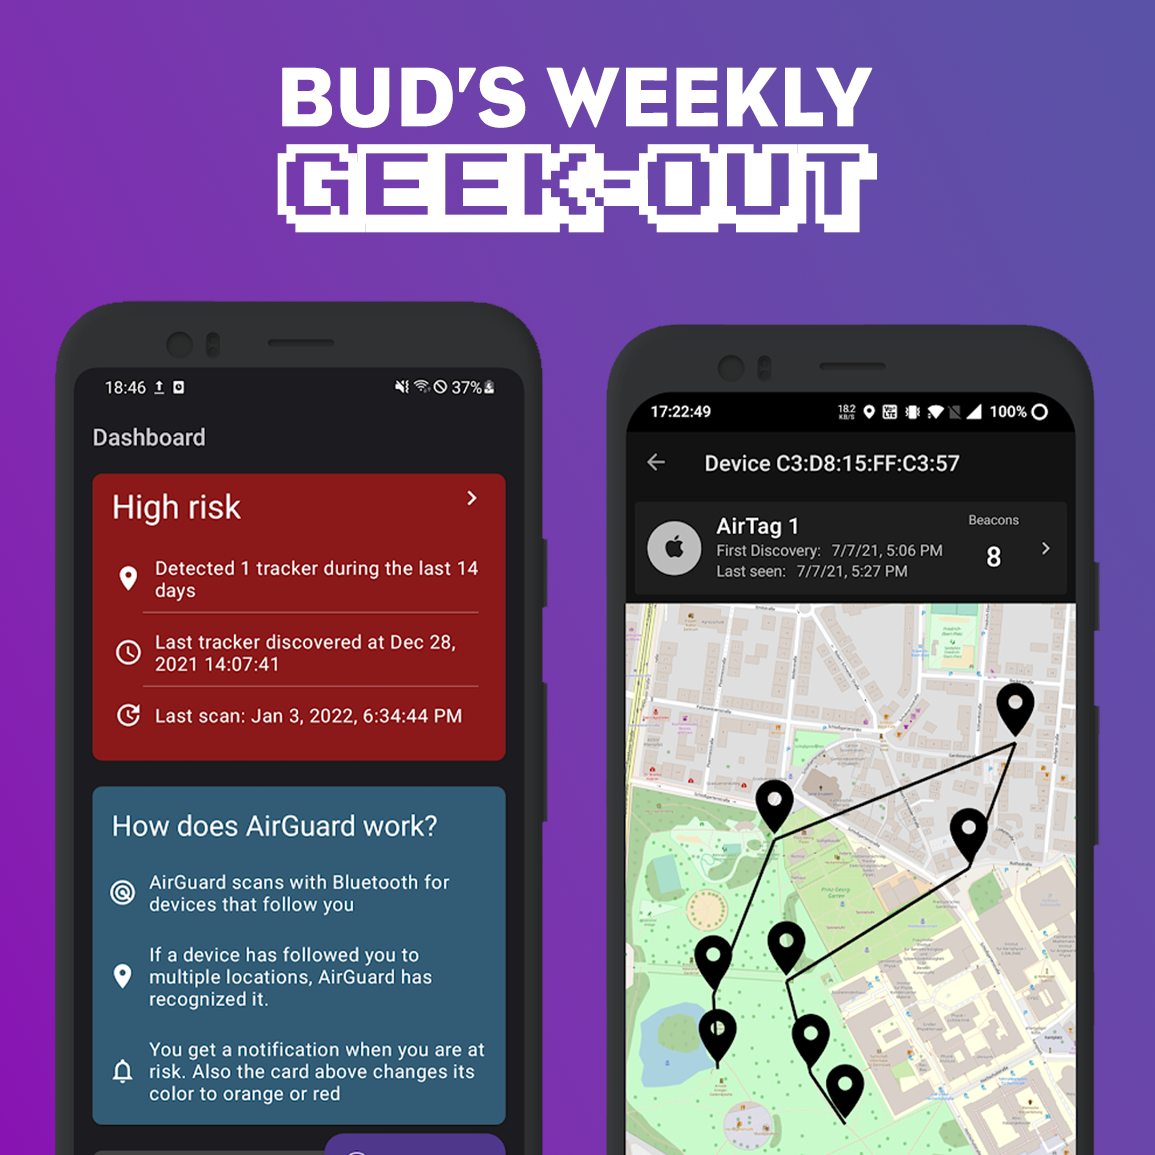 Bud's Weekly Geek-out! 20220302 - AirGuard